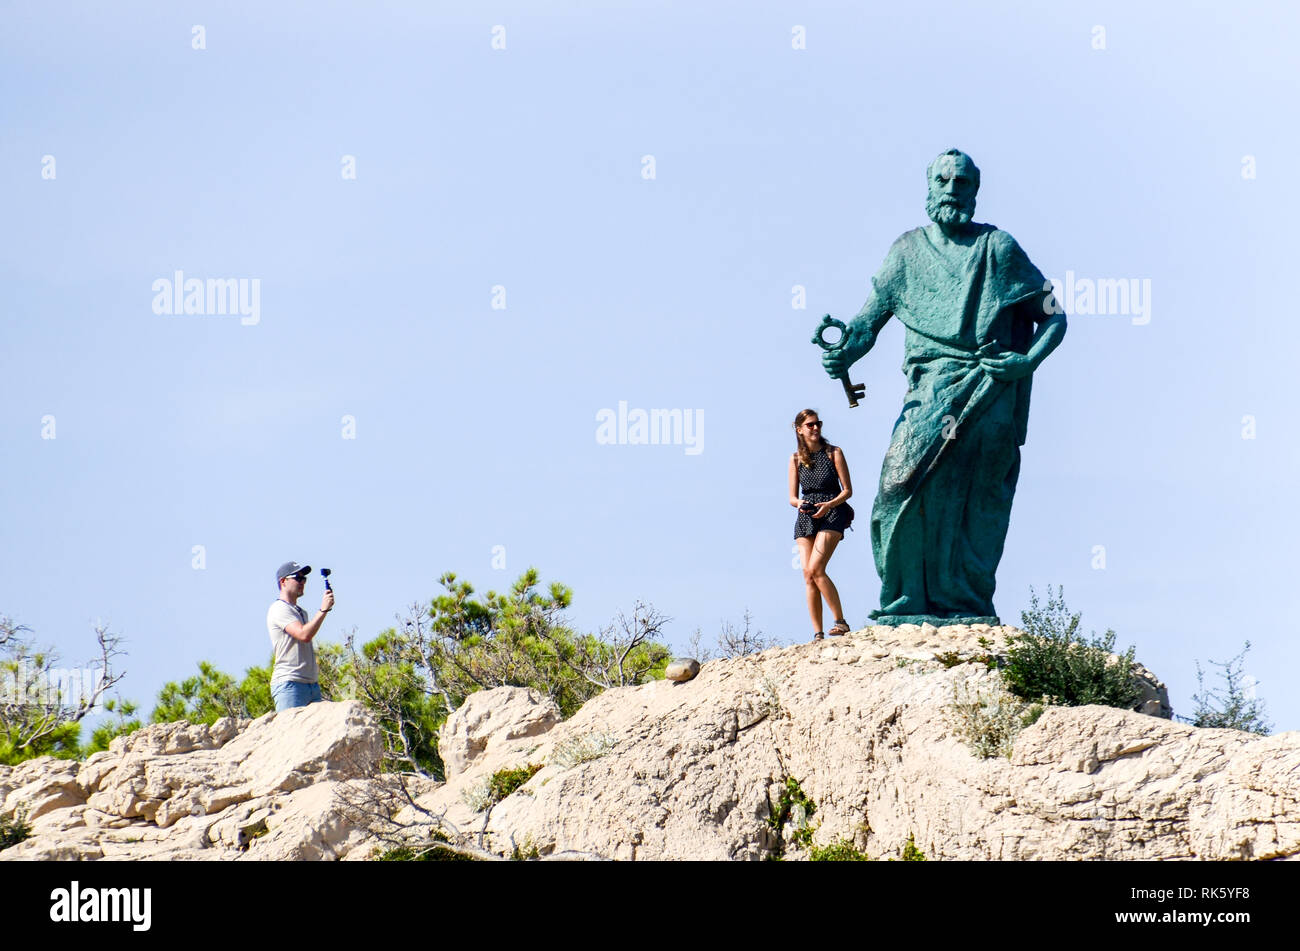 Tourists taking a picture near the statue of St. Peter holding a key in Makarska, Croatia Stock Photo